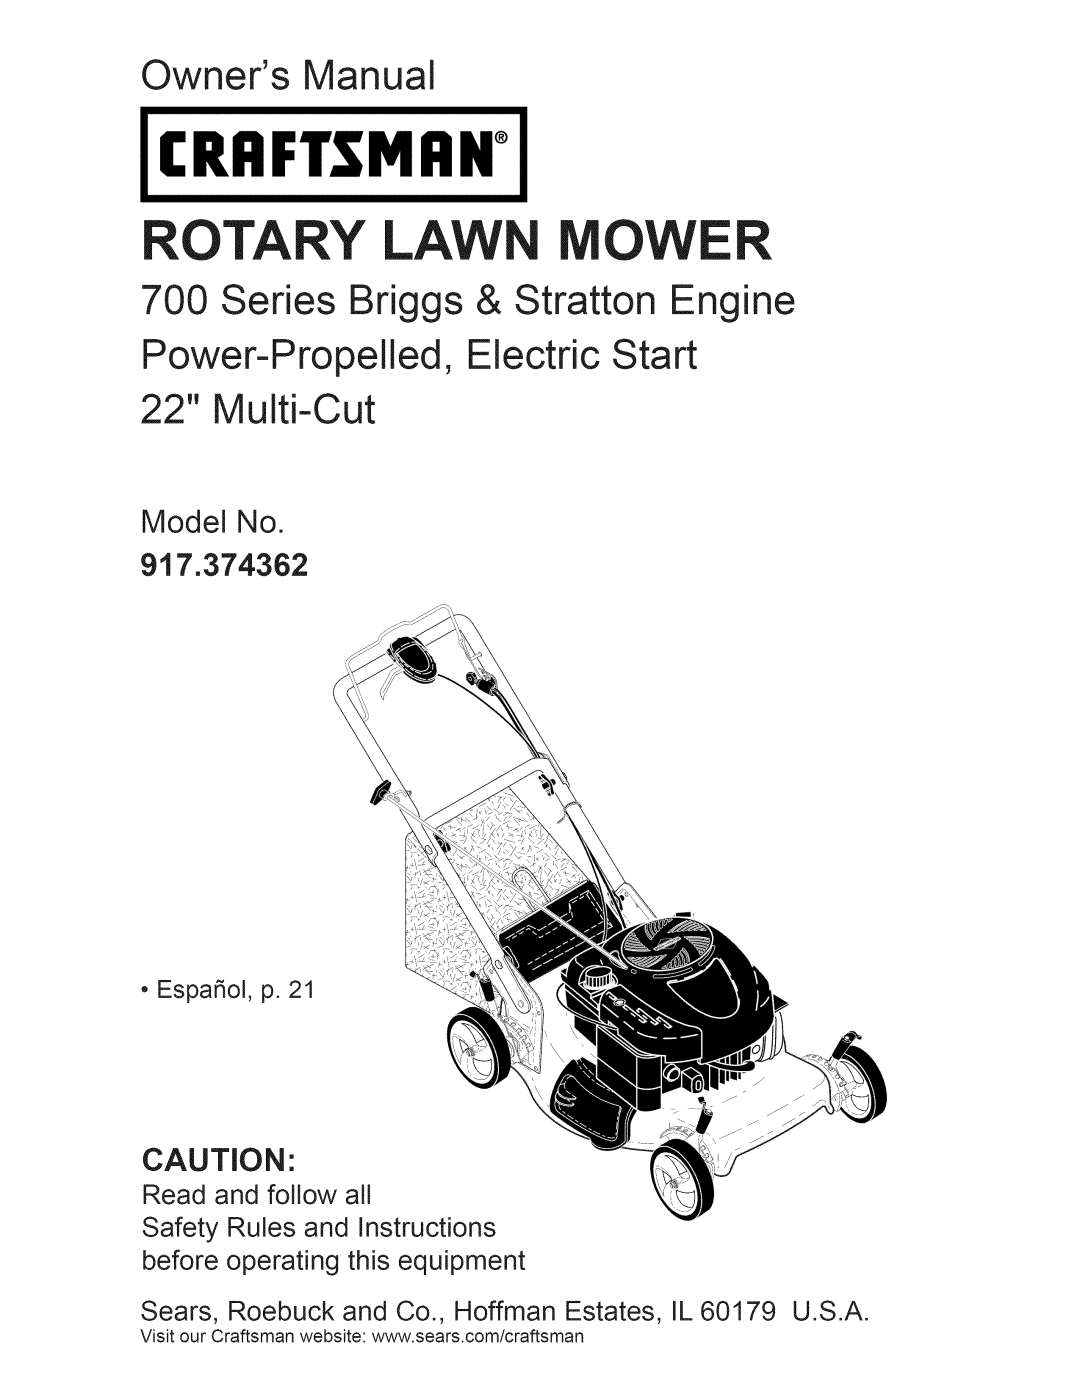 Craftsman manual Model No 917.374362, Craftsman, Rotary Lawn Mower, Owners Manual, Series Briggs & Stratton Engine 